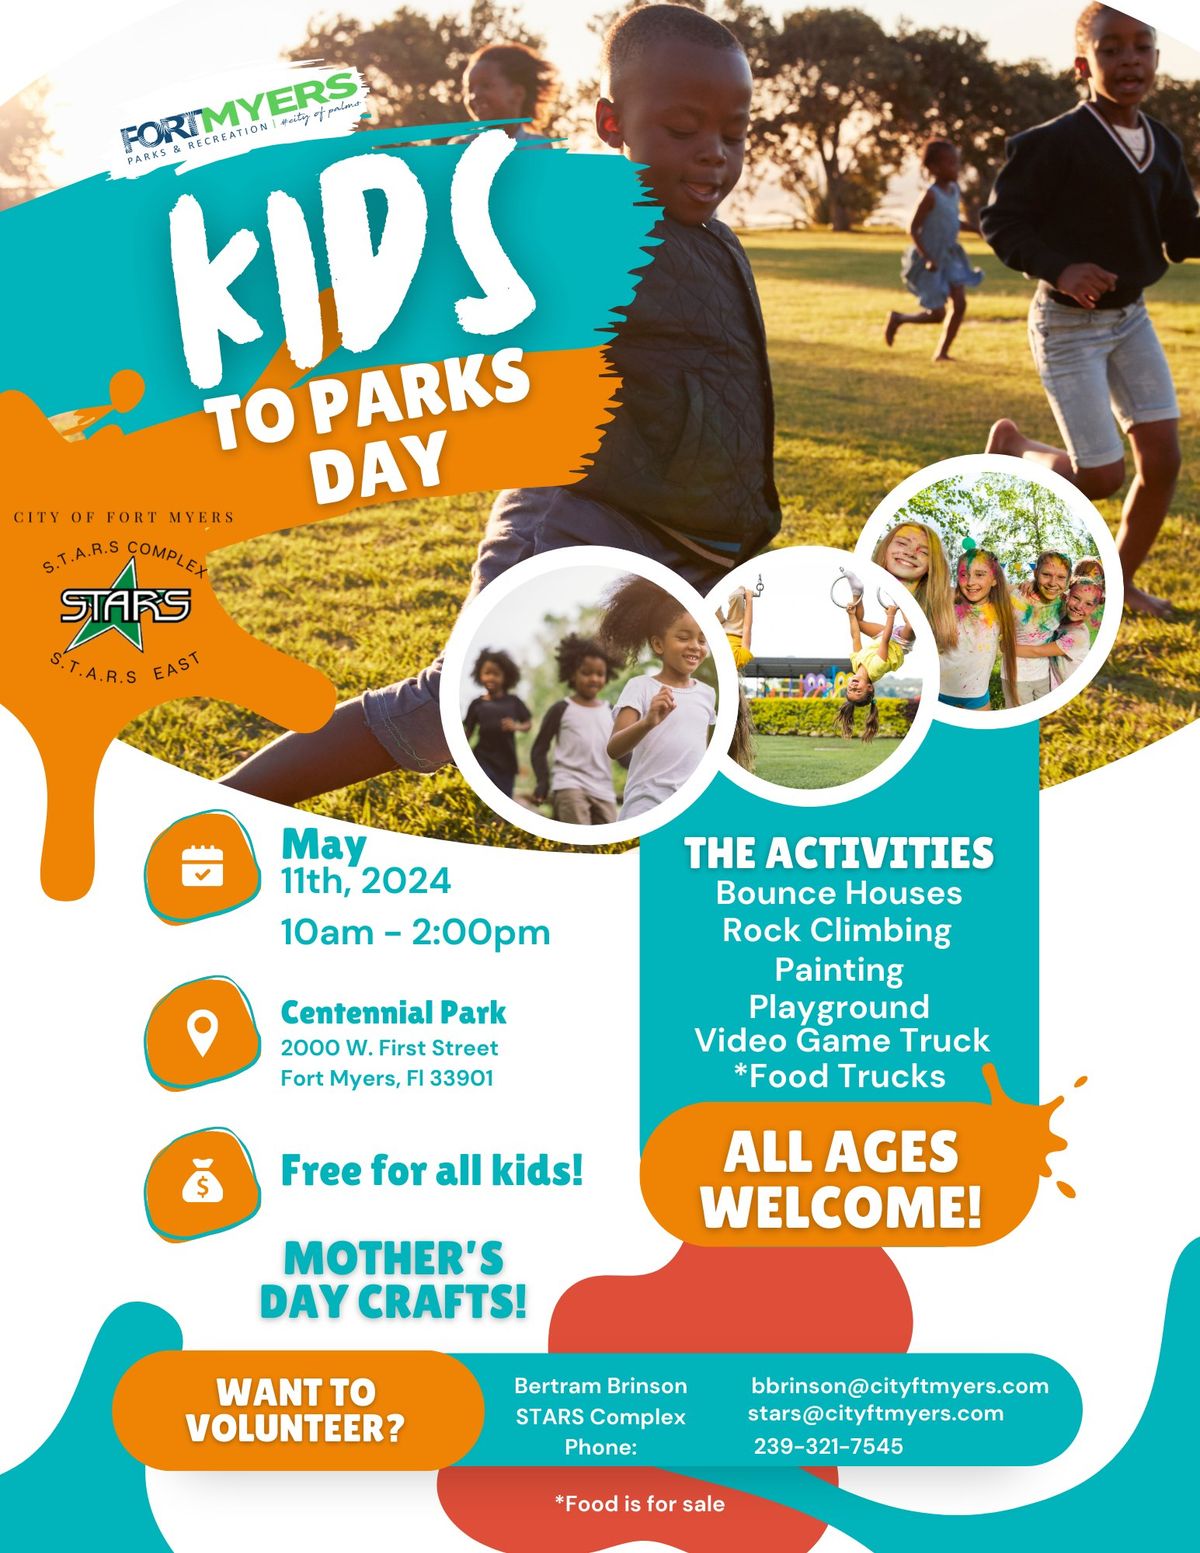 Kids To Parks Day